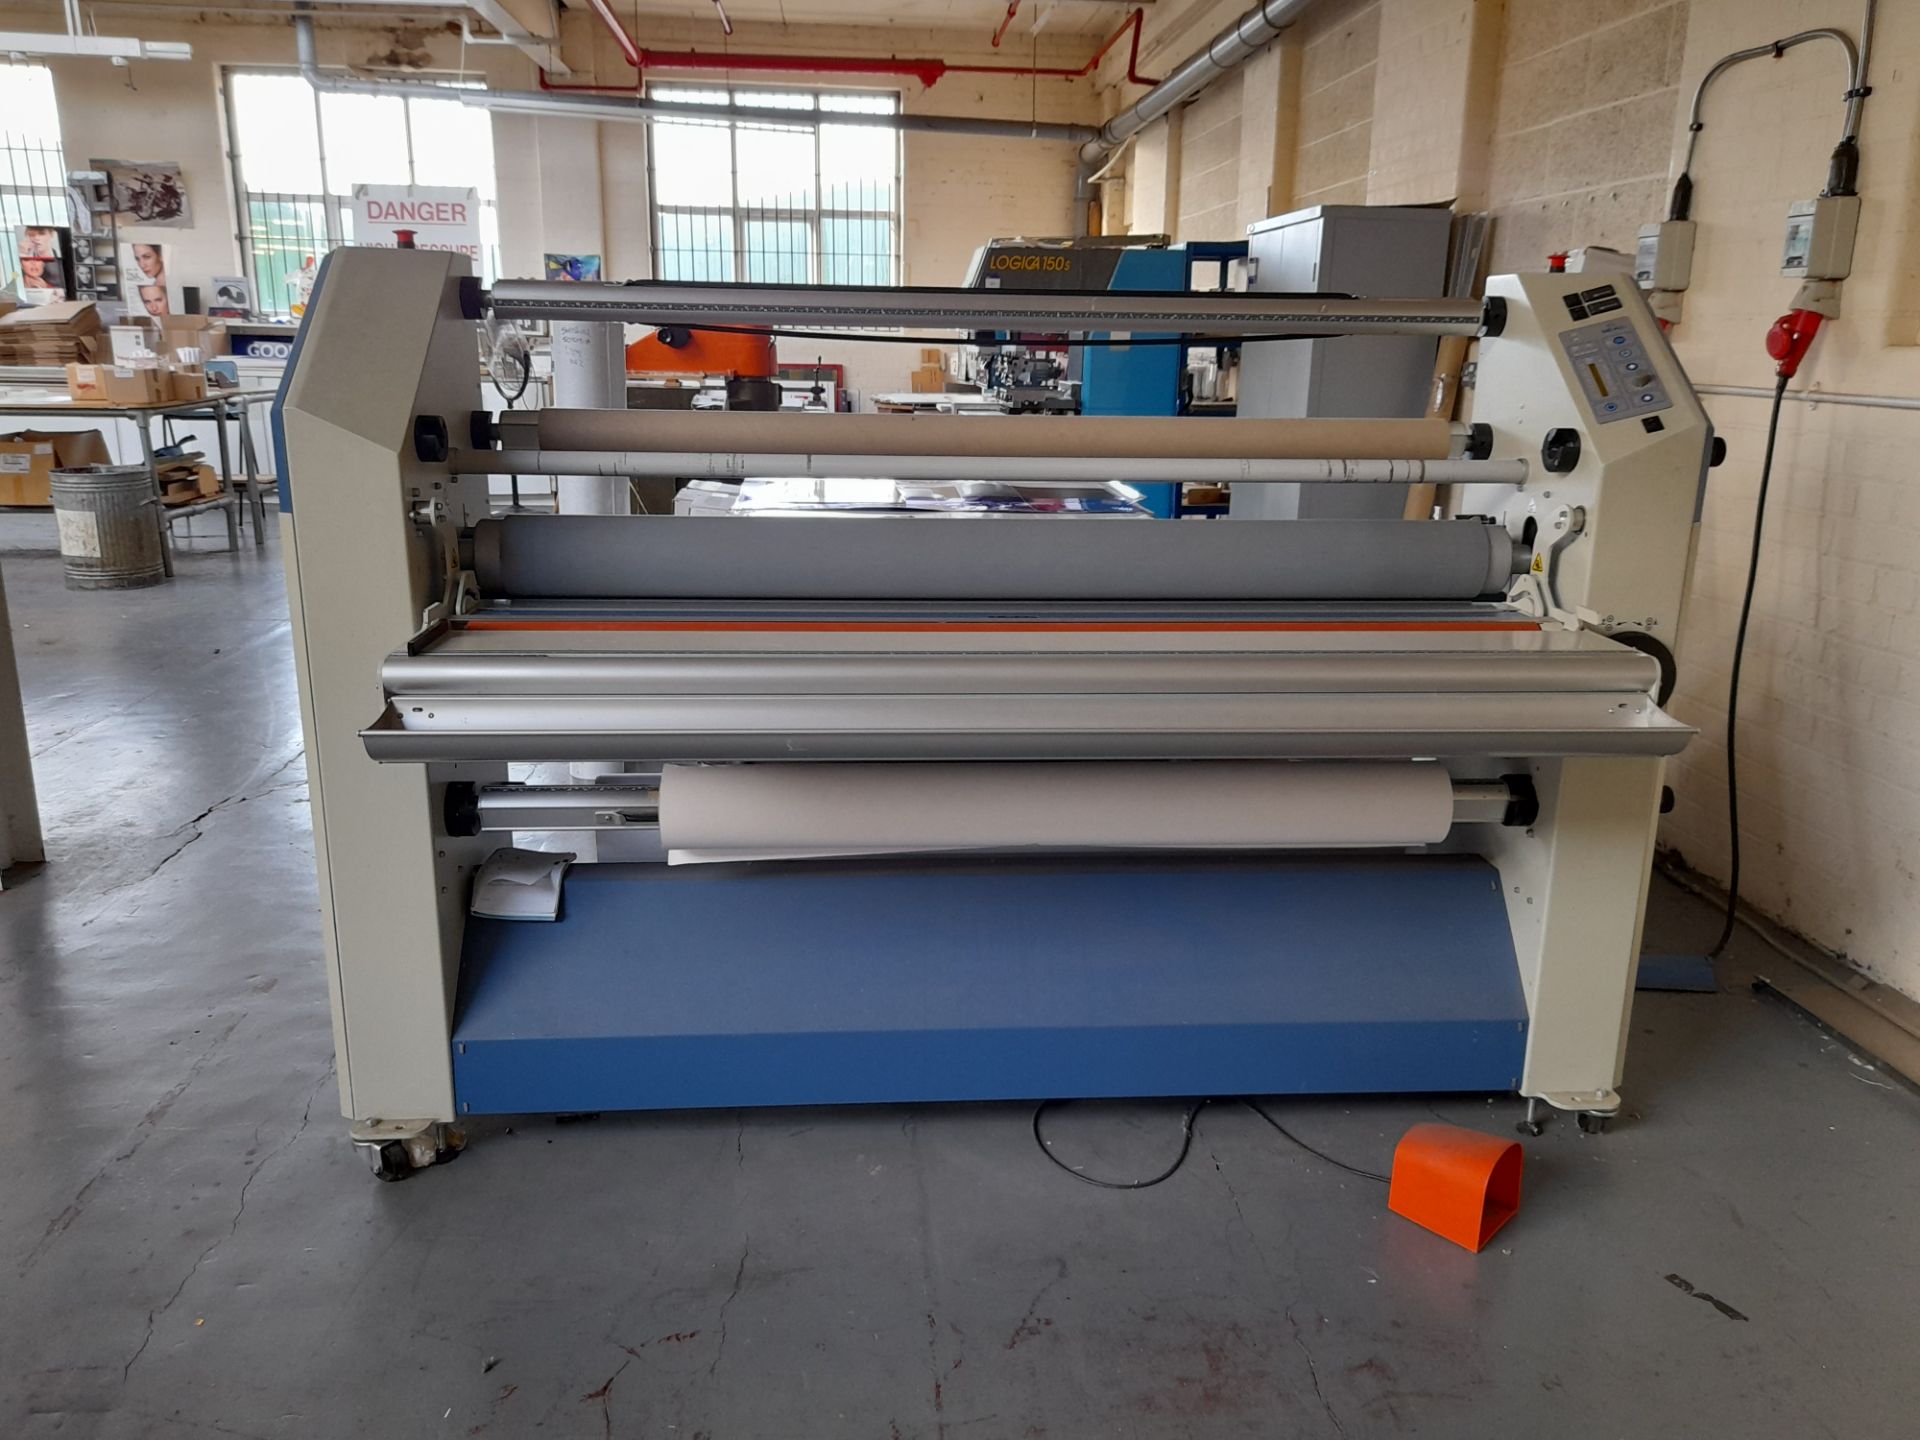 Seal 62 Pro Dual Heated Laminator, three phase, serial number 64137-00241, year of manufacture 2010, - Image 2 of 9